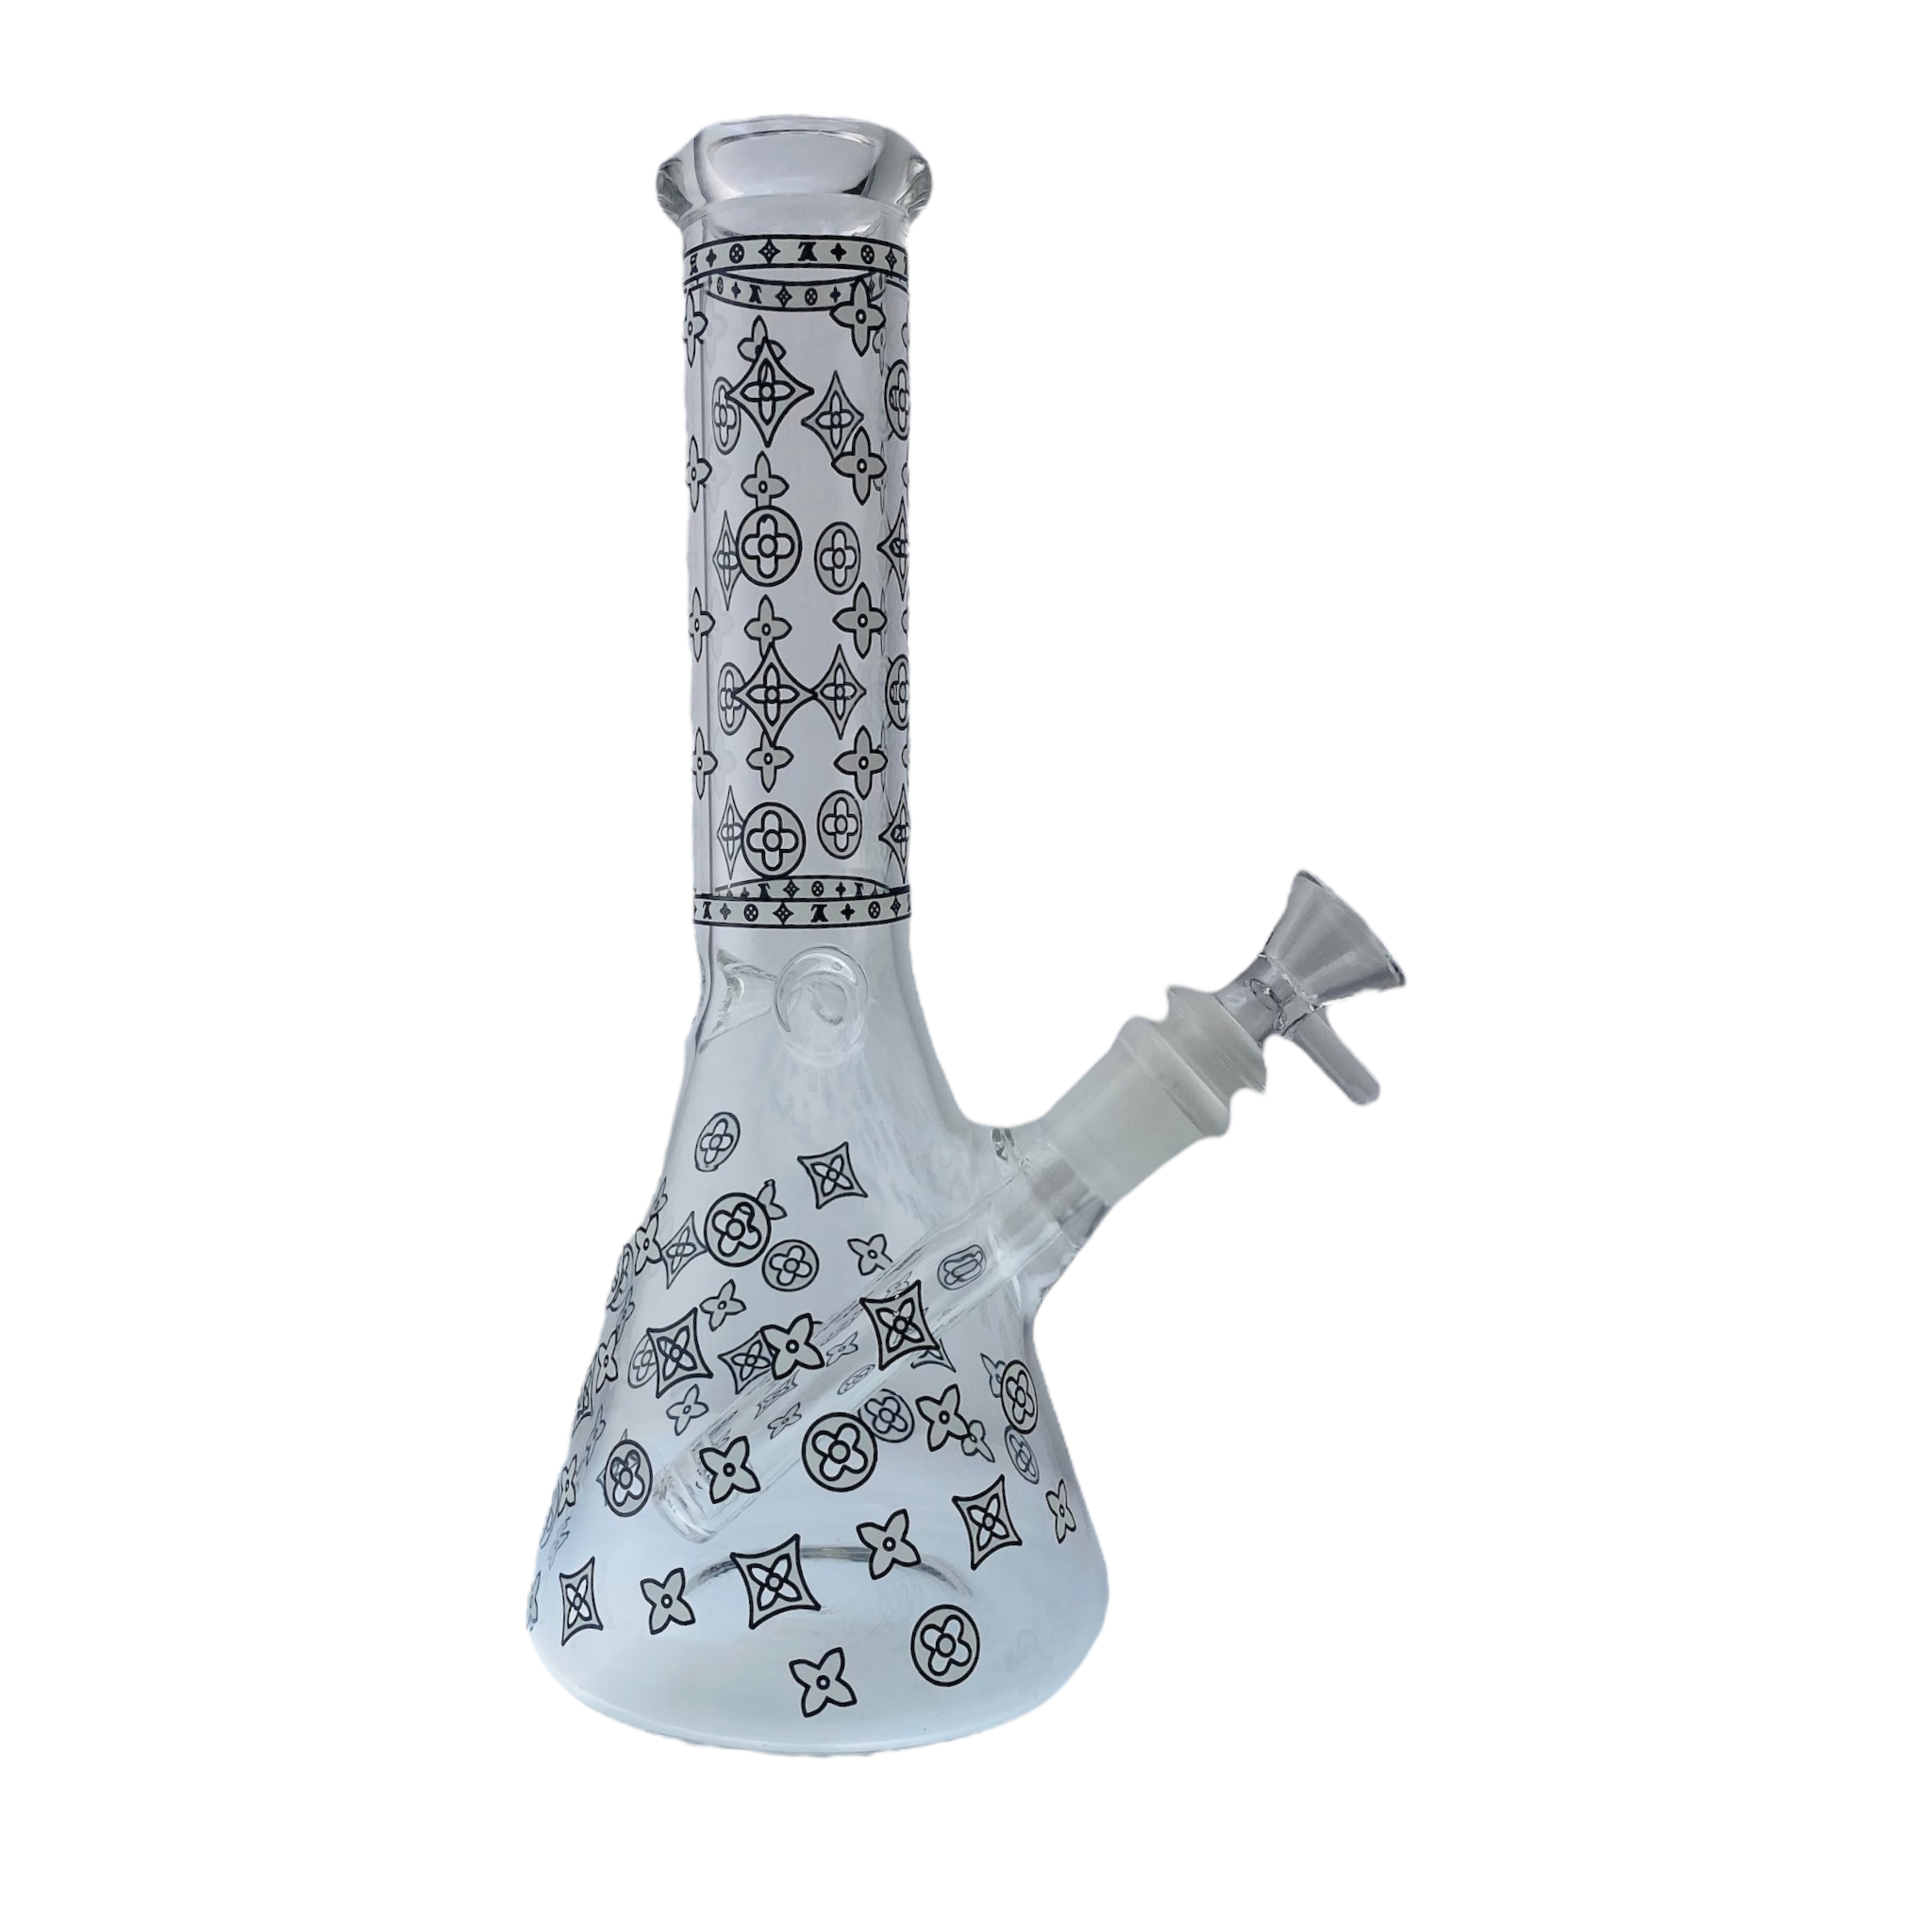 Small Beaker Bong Water Pipe With Decorative Symbols